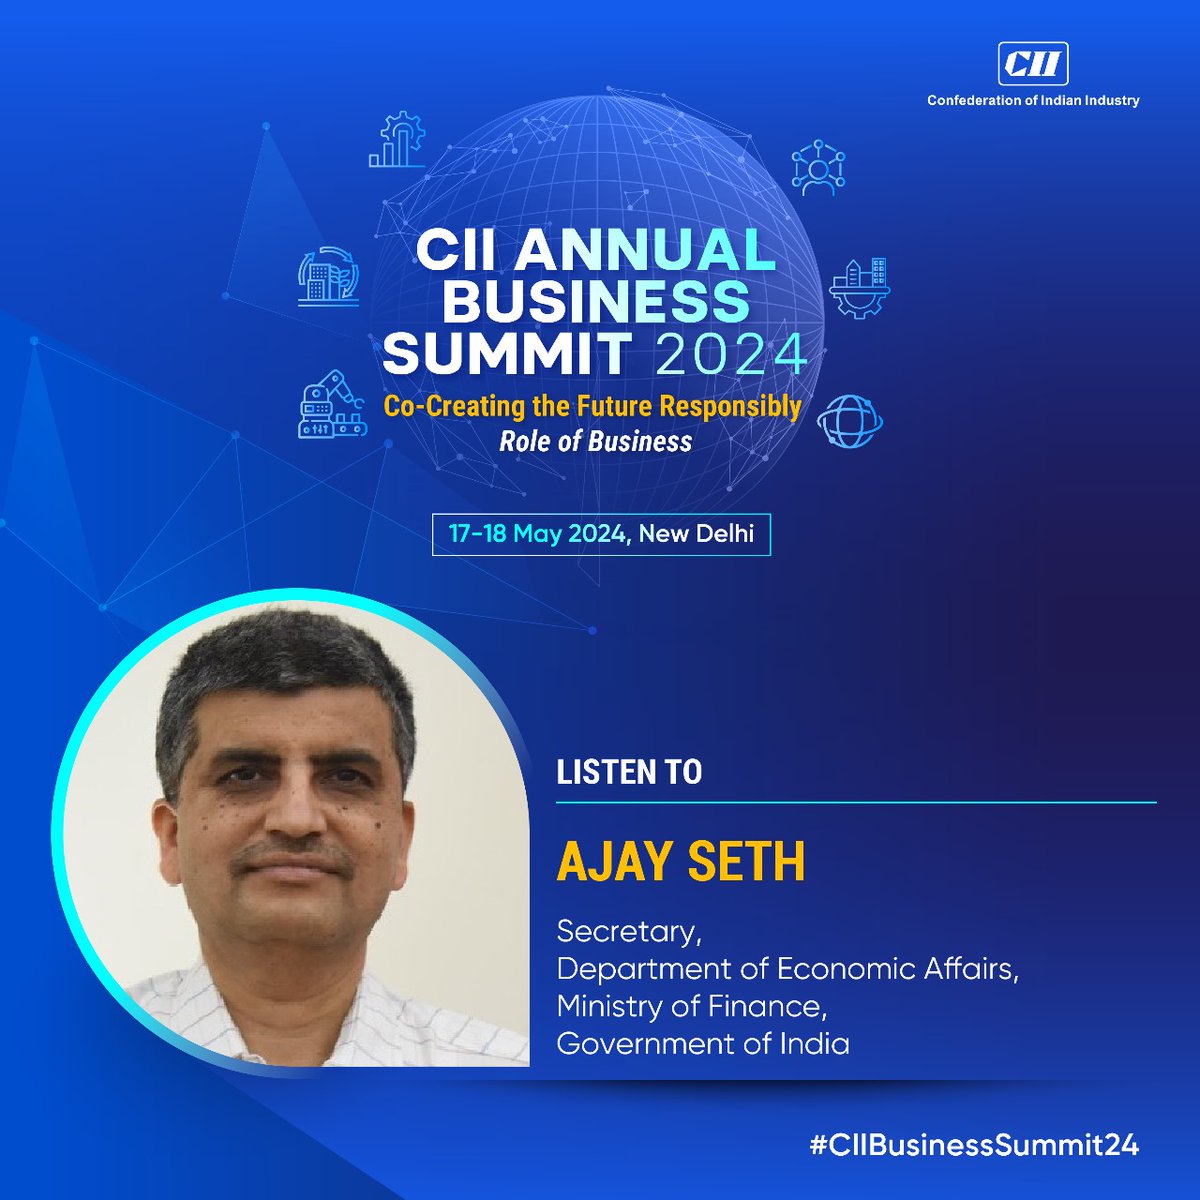 Listen to Ajay Seth, Secretary, Department of Economic Affairs, @FinMinIndia, Government of India Limited share views at the CII Annual Business Summit 2024! Gather deep insights as top minds from the government and industry draw the roadmap towards a developed India. Block your